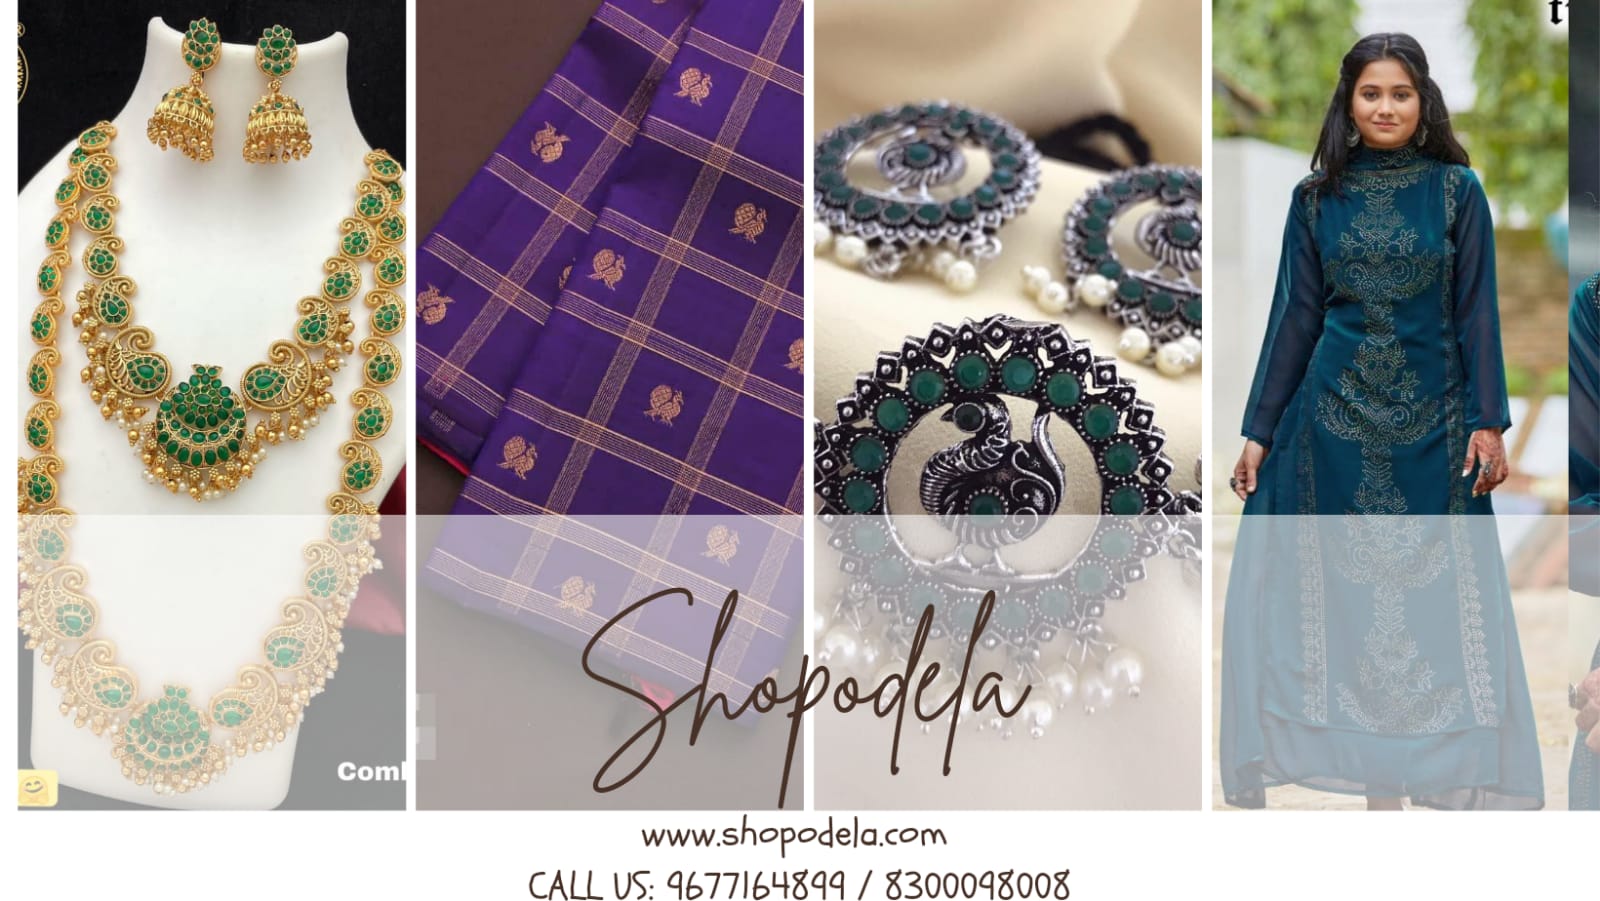 Load video: Shopodela is the online destination for trendsetting artificial jewelry, apparels and many more